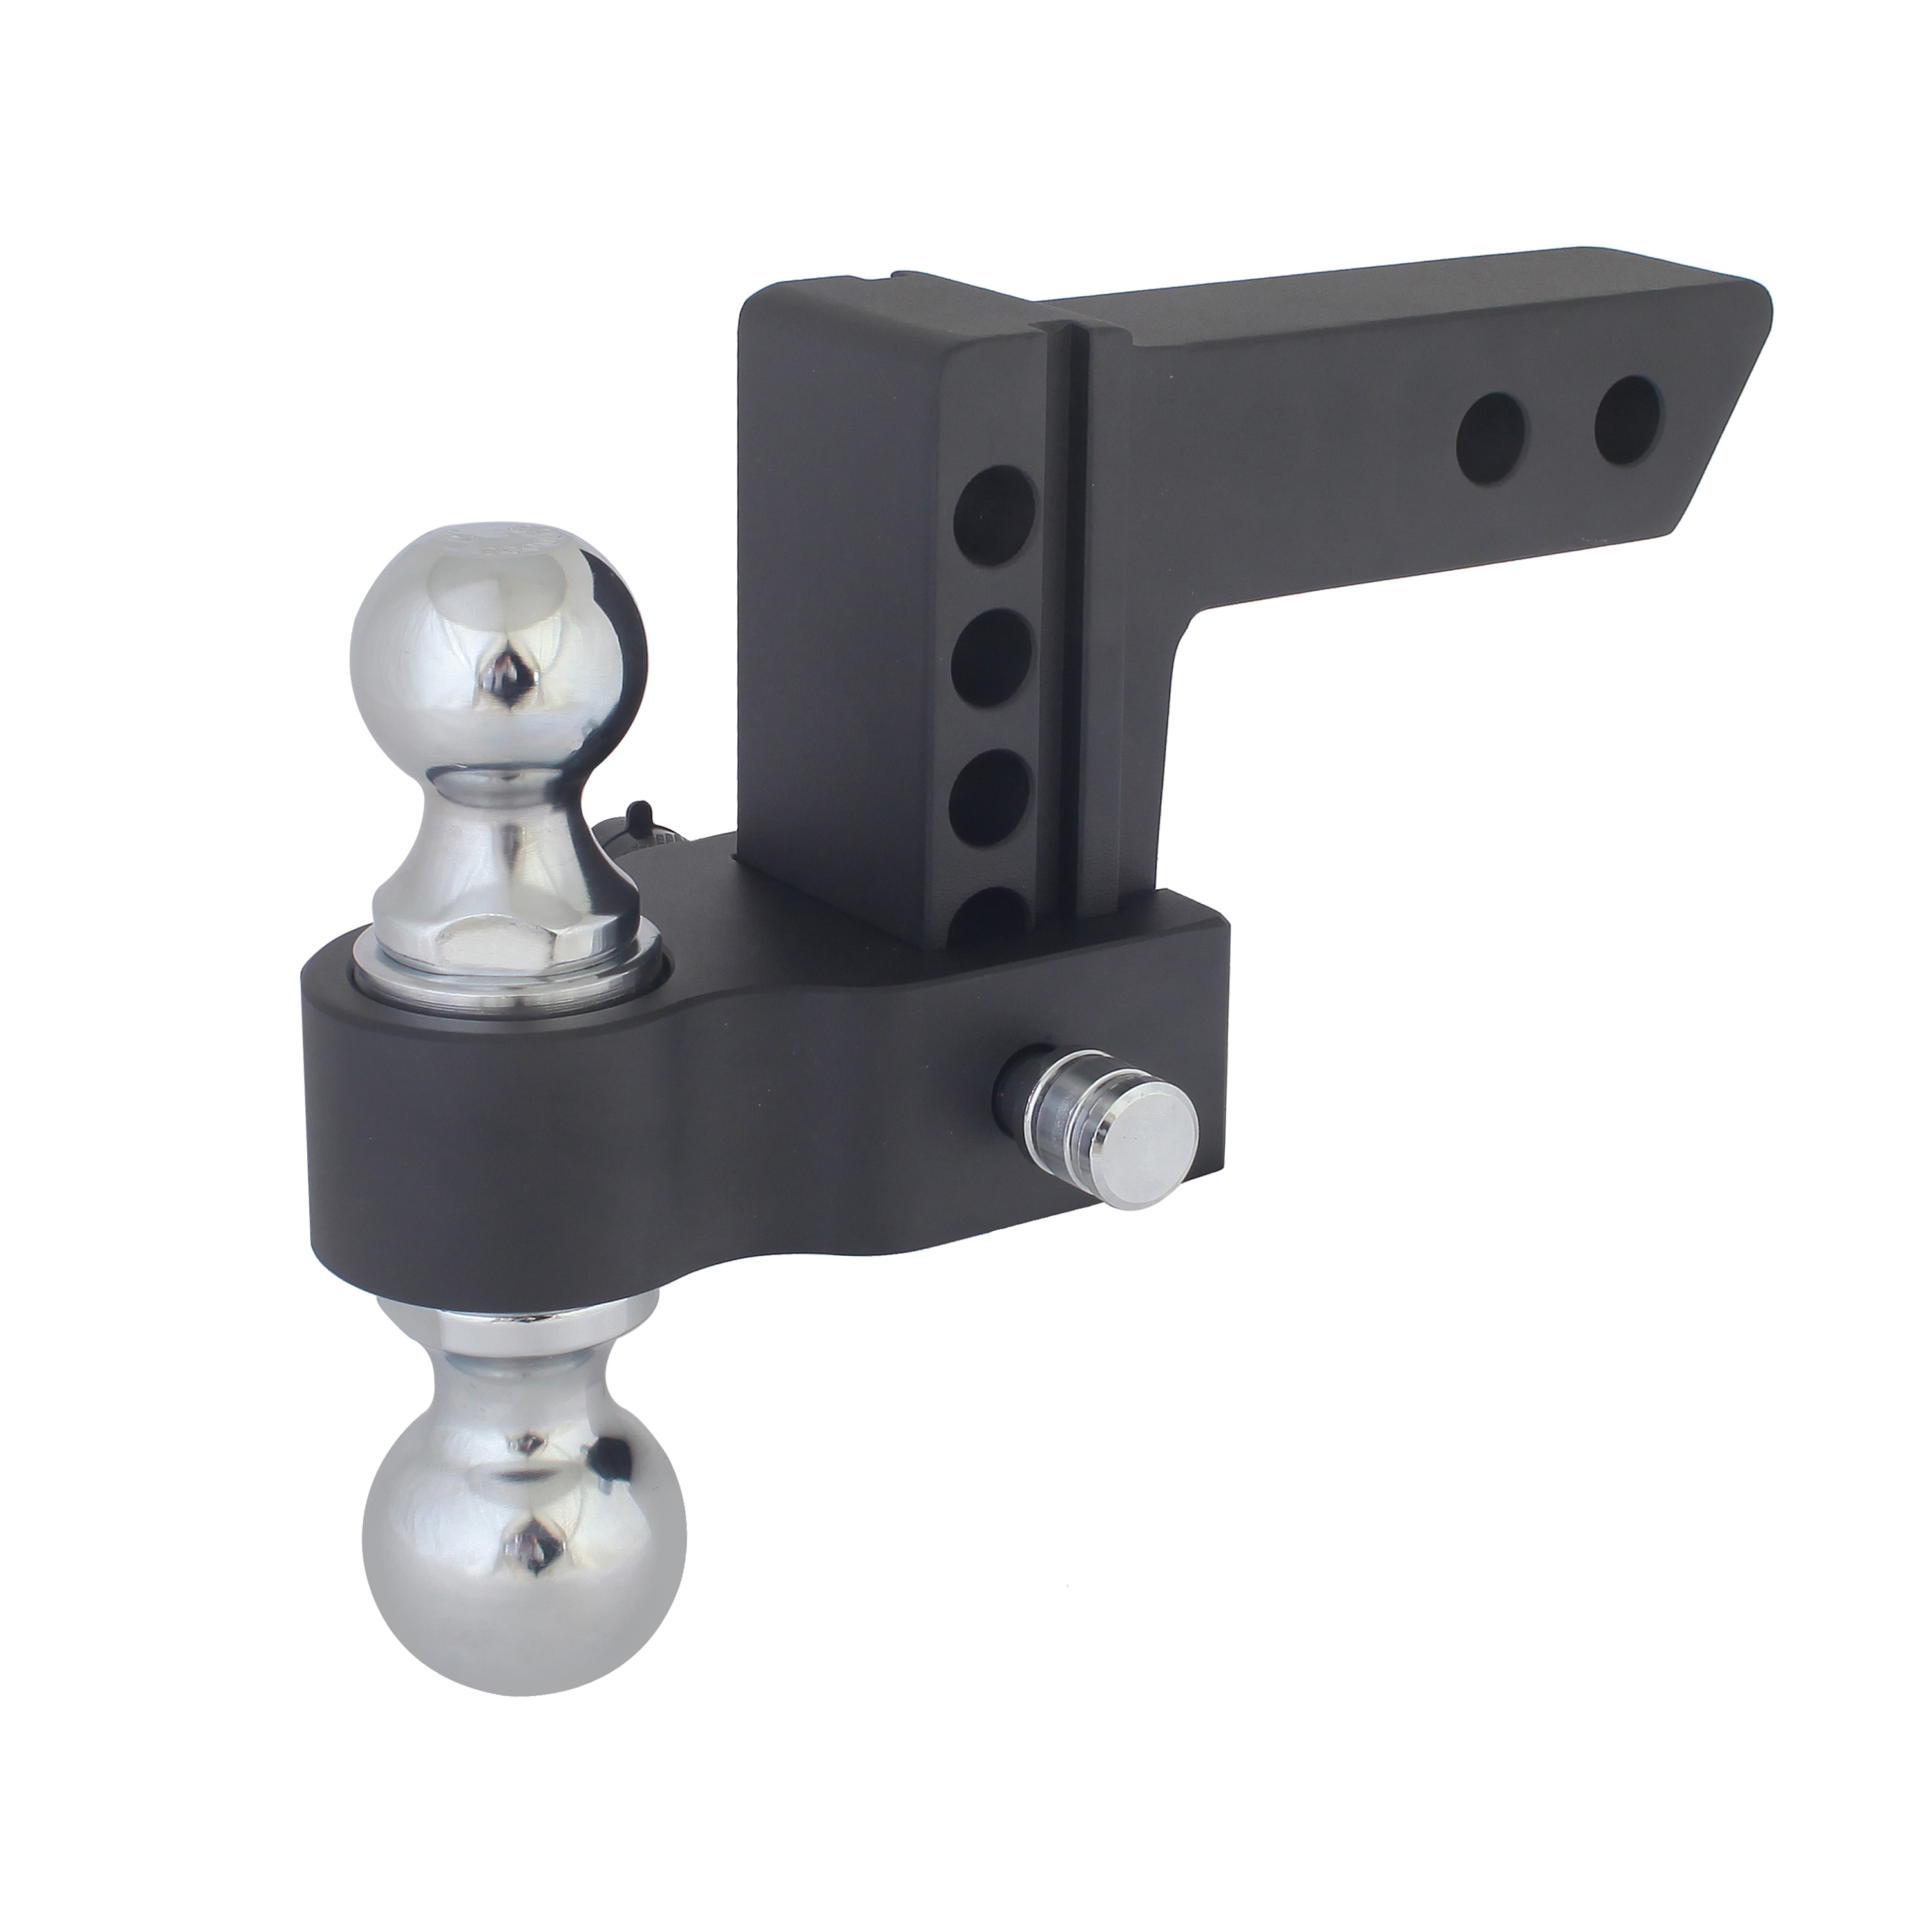 Details about   Adjustable Ball Mount Hitch Drop Trailer 8 Position 5000 Lbs Heavy Duty Towing